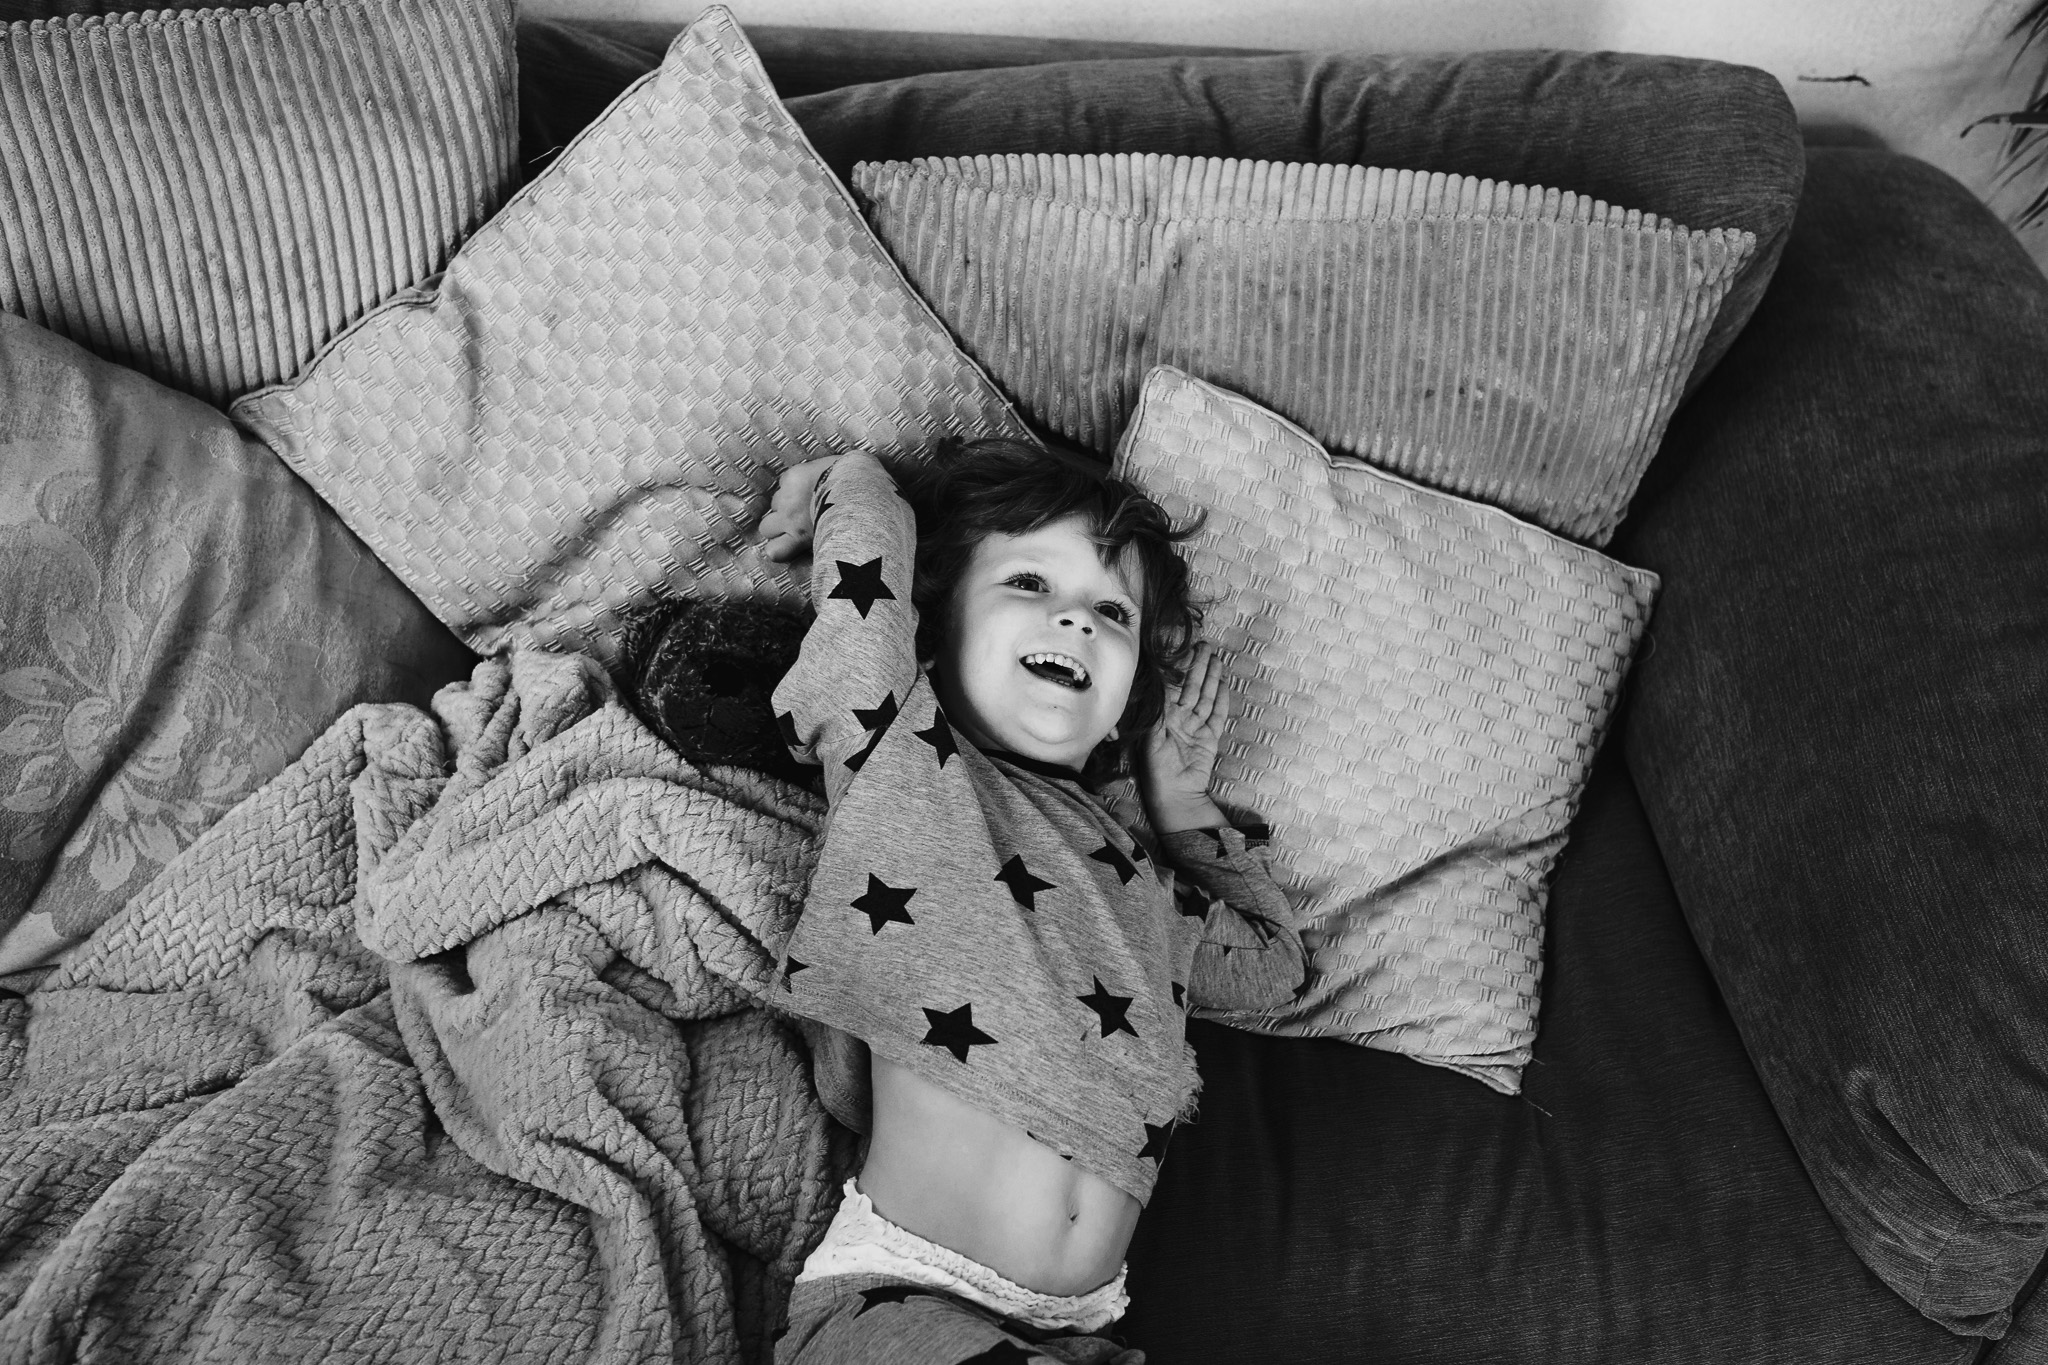 Young boy in star pyjamas laughing and playing on sofa cushions during a family photo session.